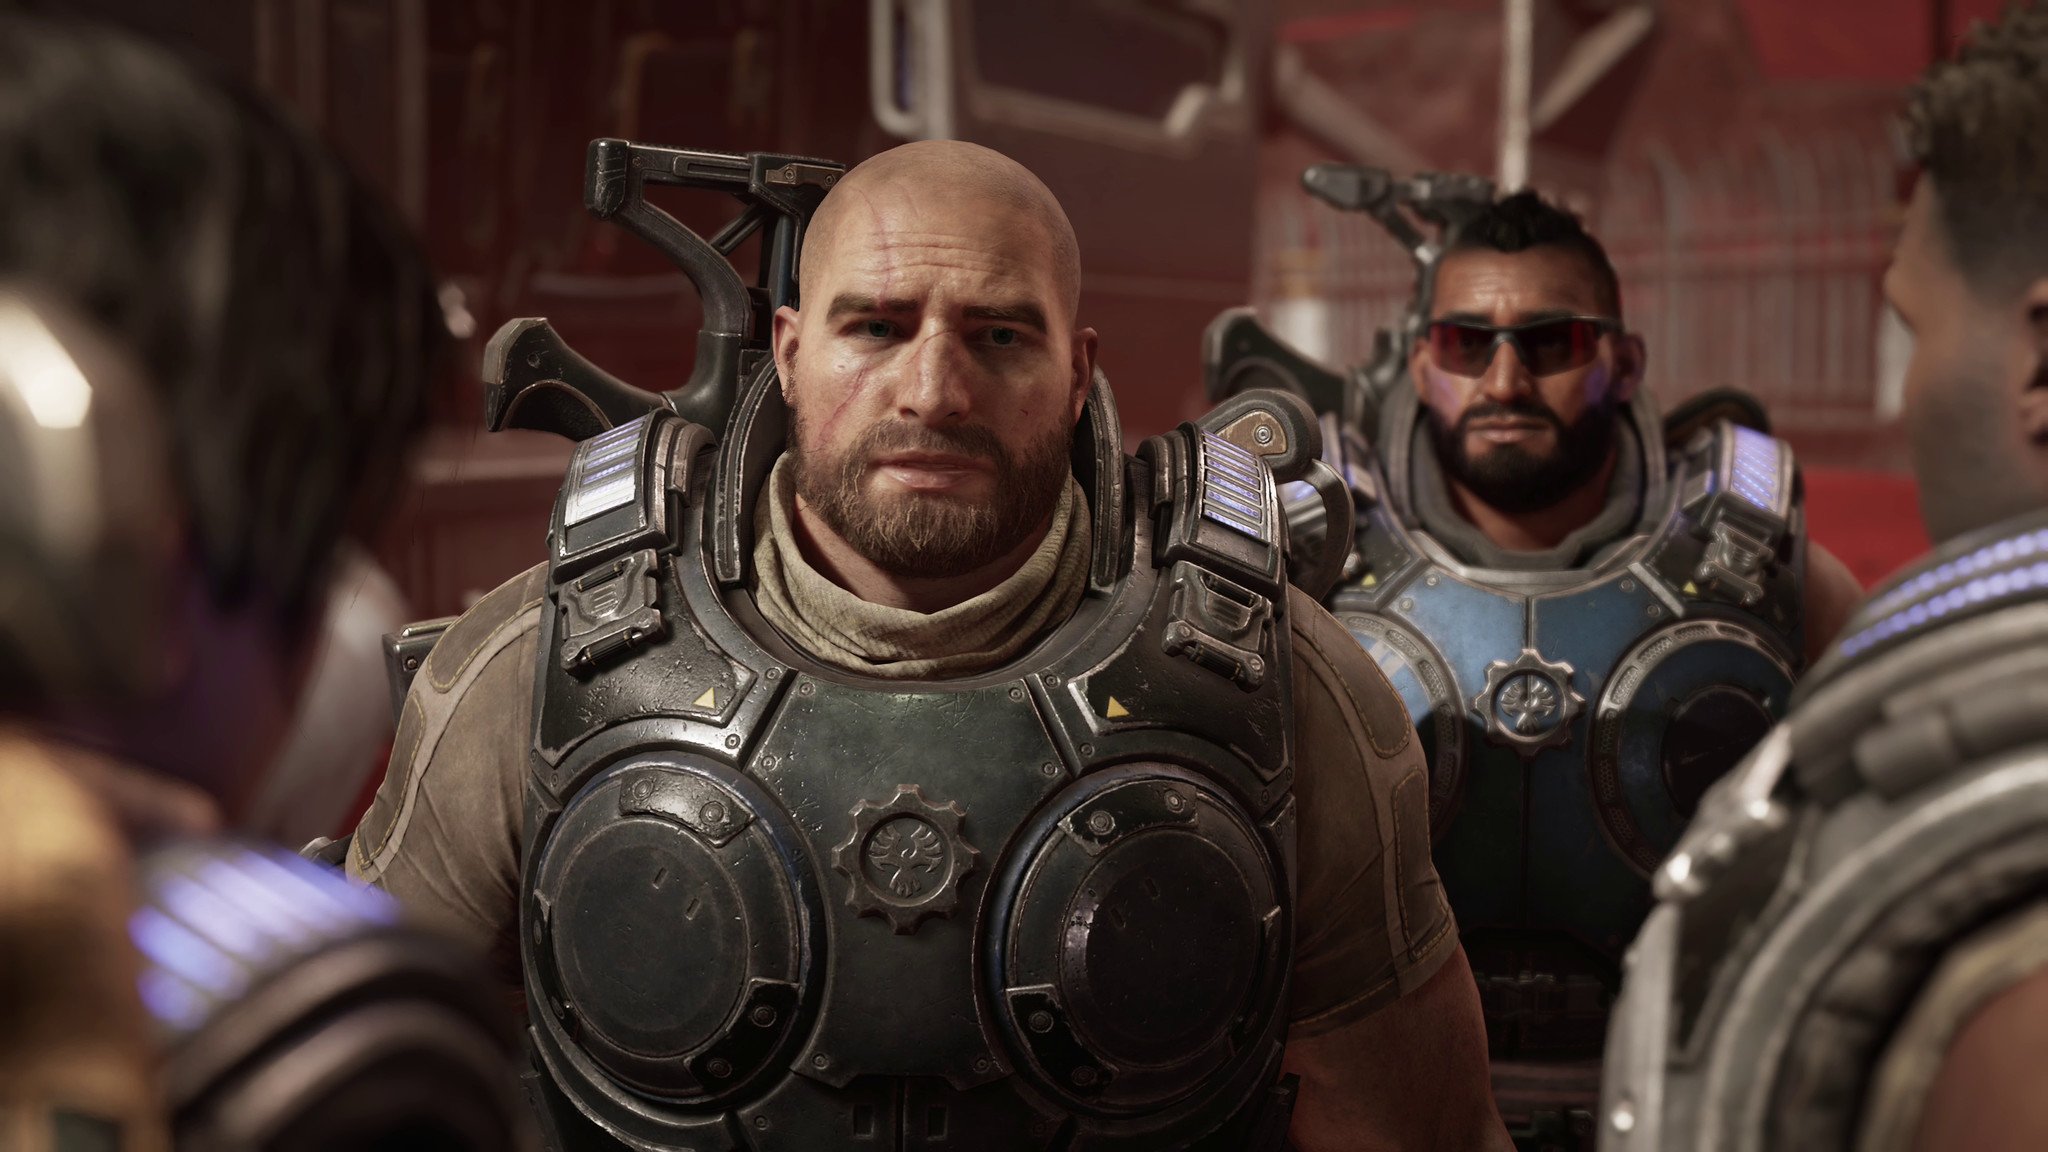 Gears 5 Operation 4 adds new characters, maps, and more - EGM